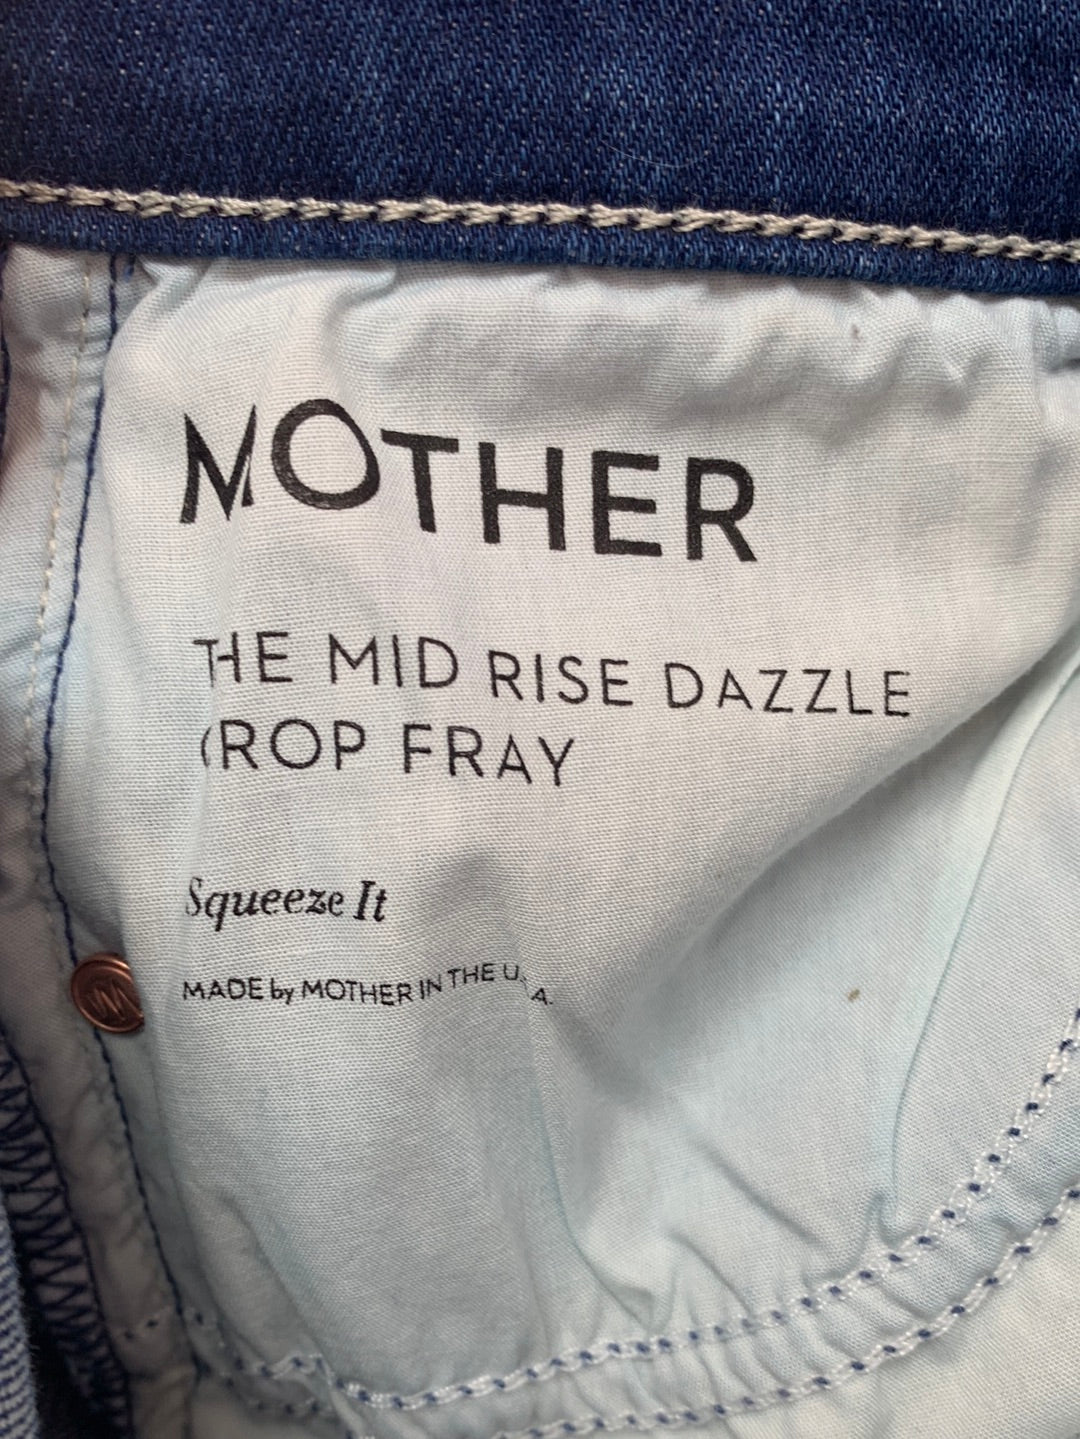 MOTHER squeeze it The Mid Rise Dazzler Crop Fray Jeans - 24